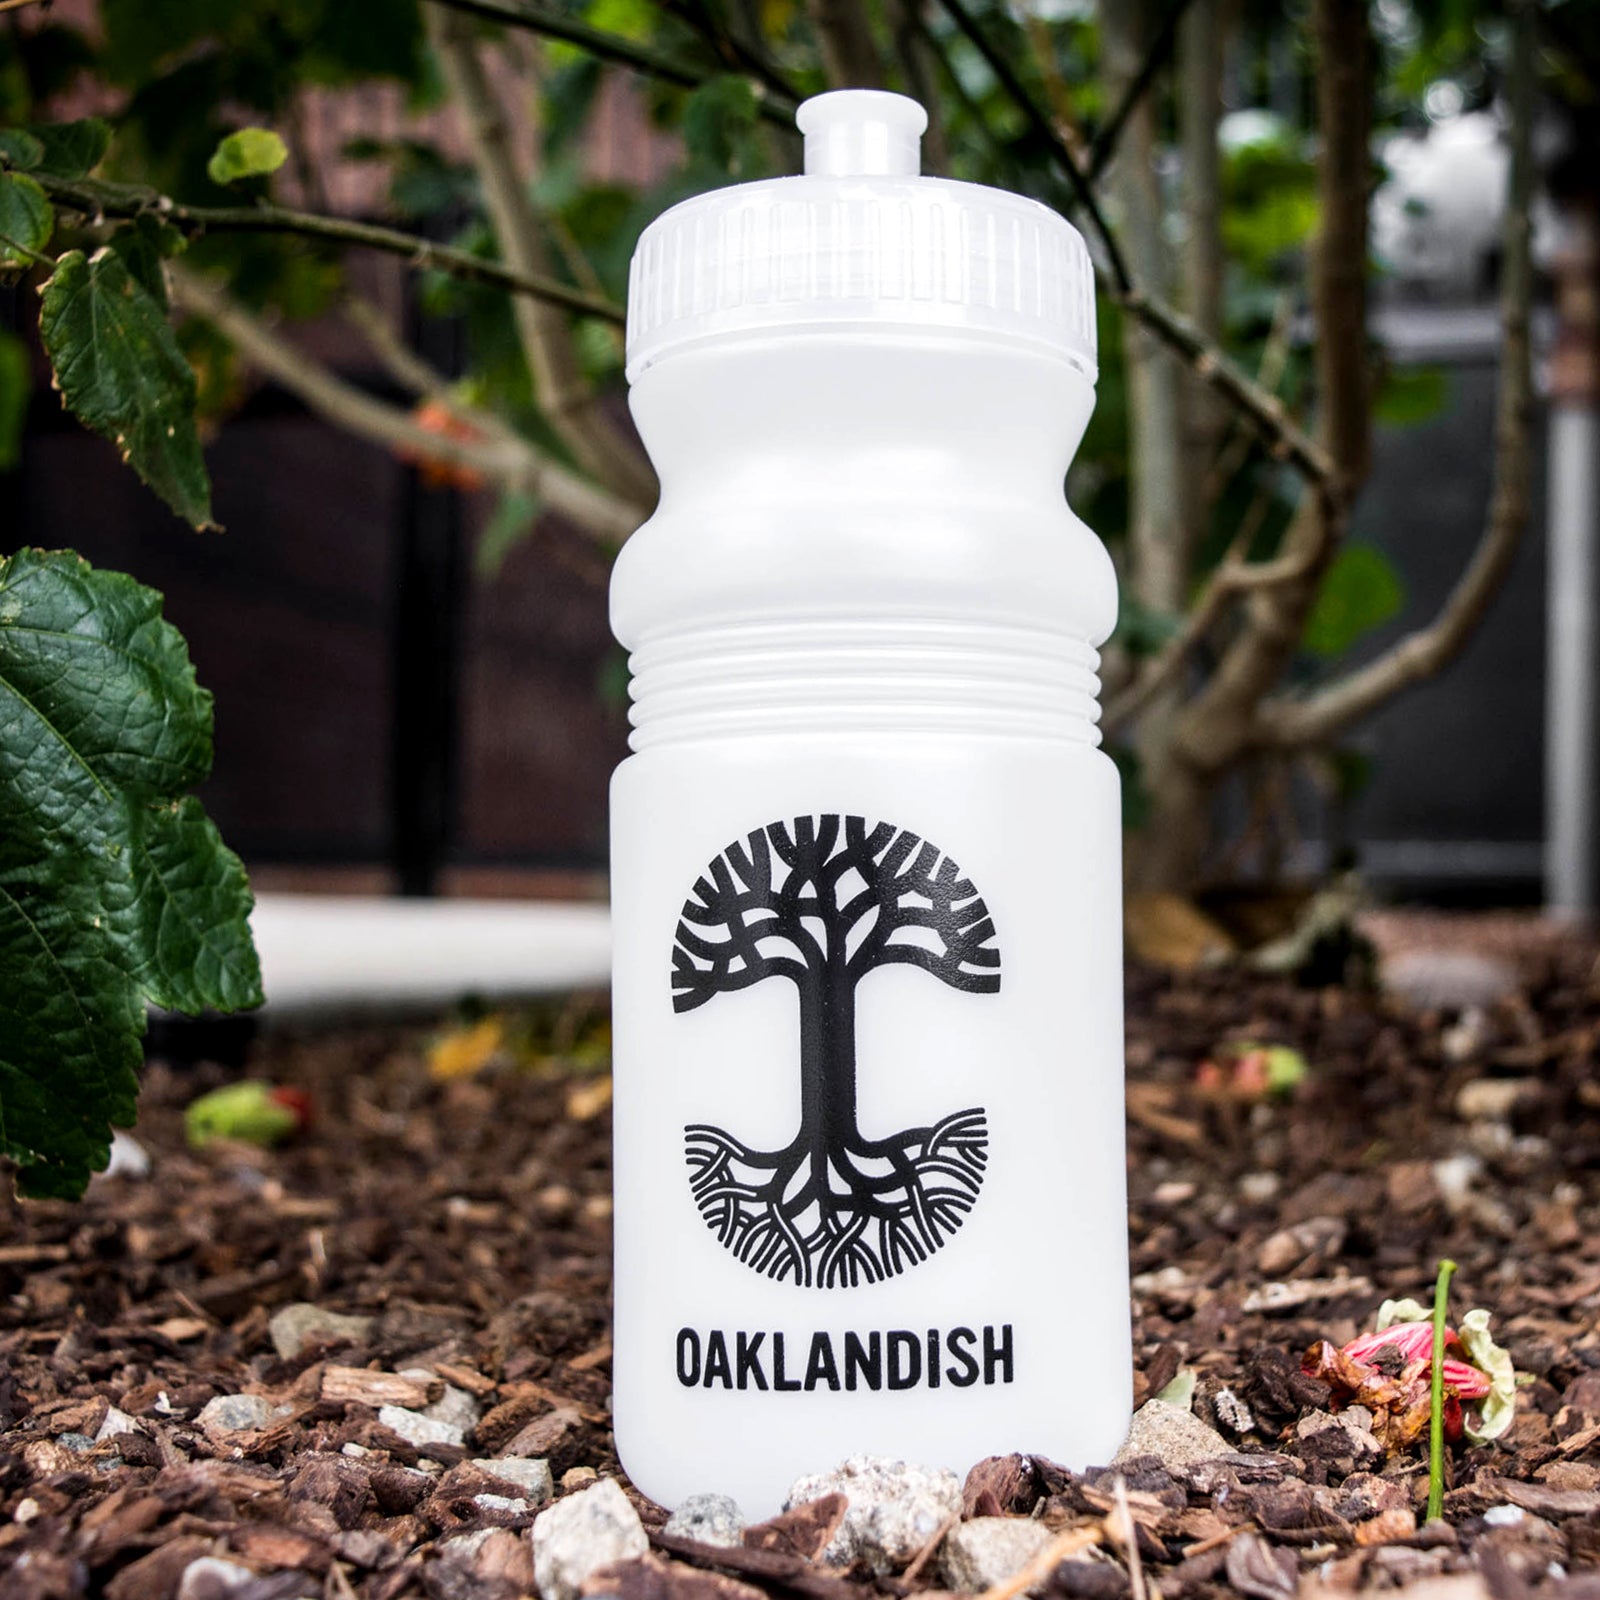 Frost white bicycle water bottle with a black Oaklandish tree logo and wordmark in a wooded outdoor area.